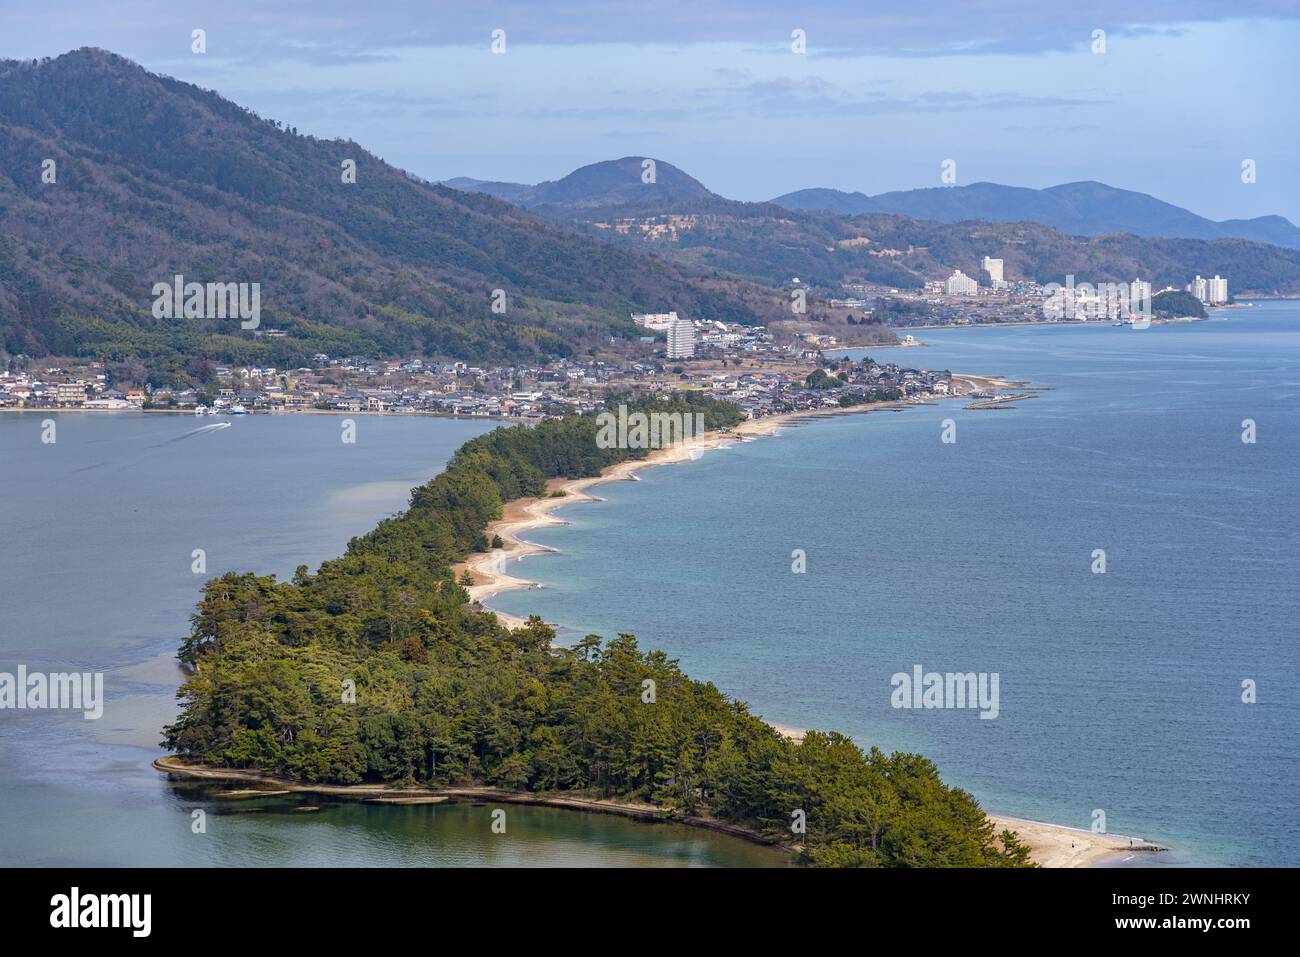 Amanohashidate on the Sea of Japan in north Kyoto prefecture considered as one of the top three scenic views in Japan Stock Photo